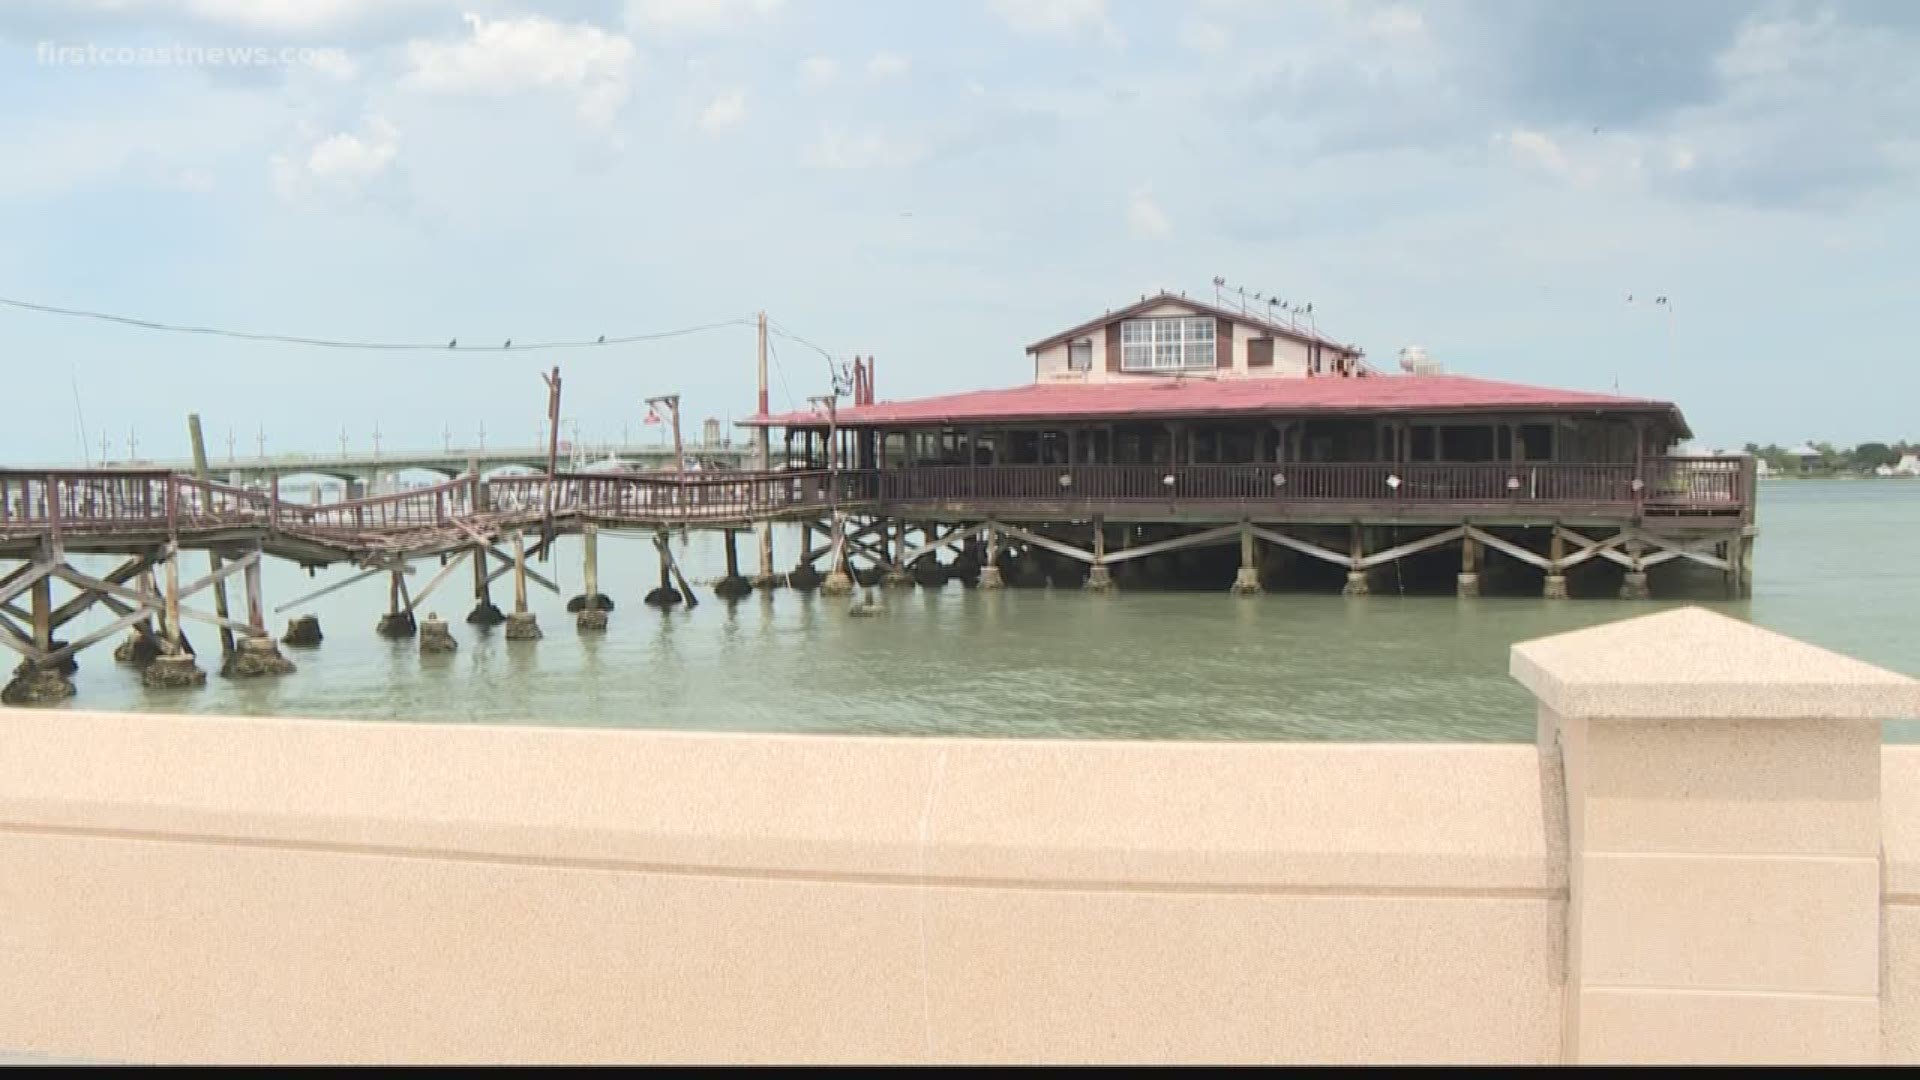 The old Santa Maria restaurant has been described by many as an eyesore. Its owners and the City of St. Augustine has been going back and forth on how to rebuild it.